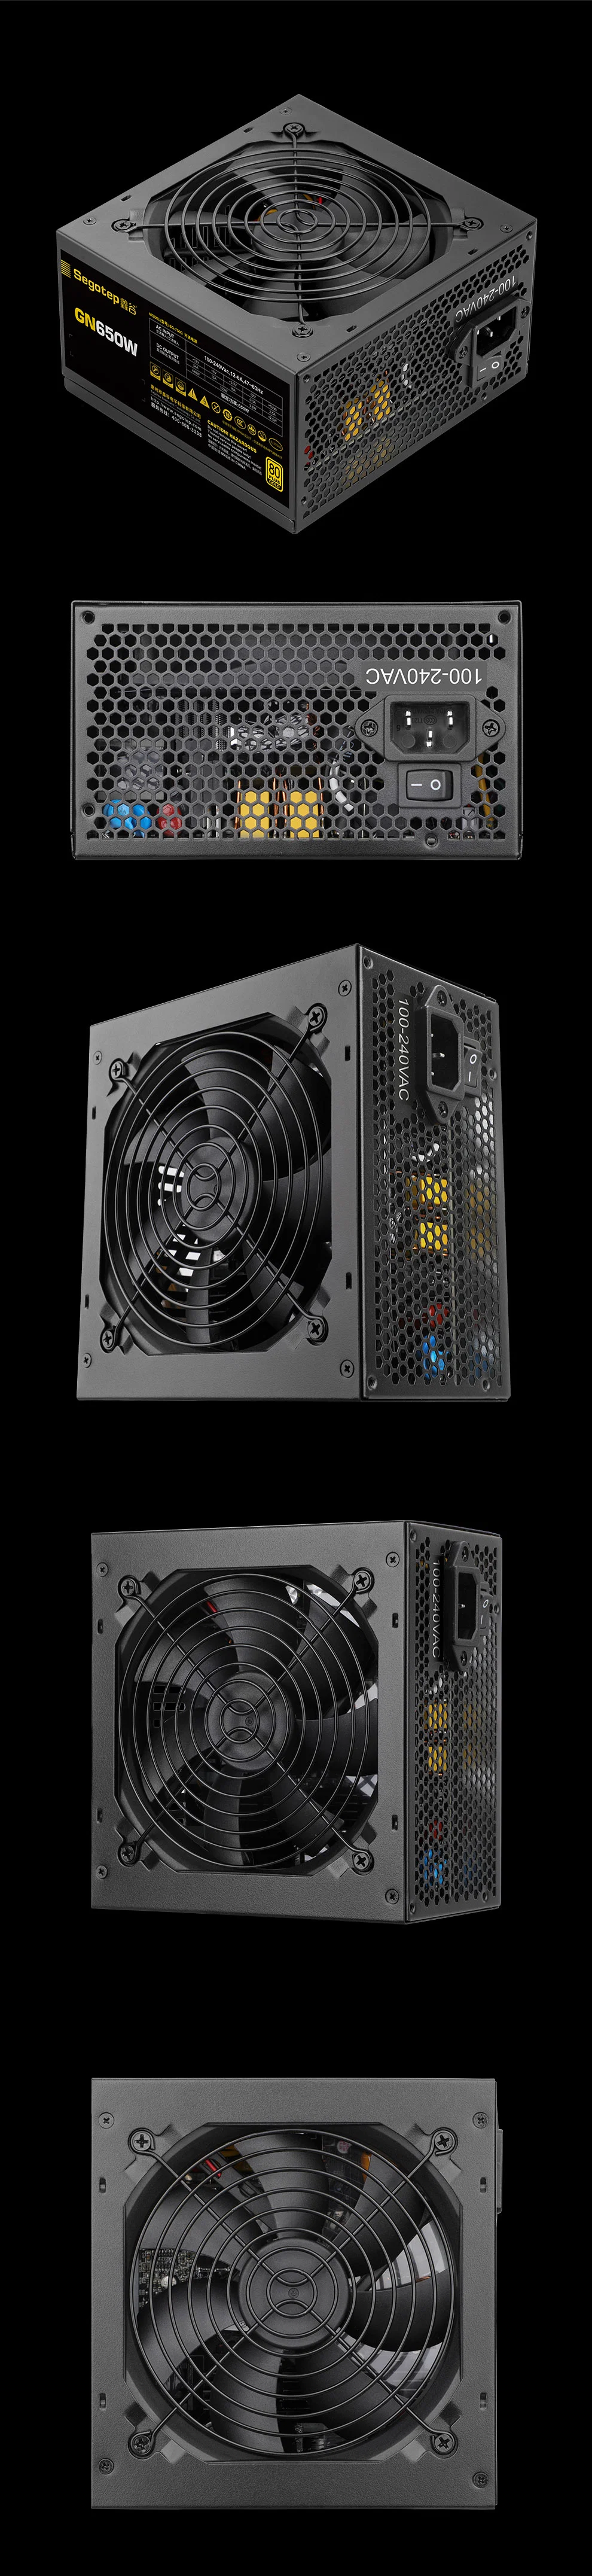 Sale to Germany Finland 650W ATX 80 Plus Gold Solid Japan Capacitor GPU8pin Carry High End Graphic Card Computer Power Supply